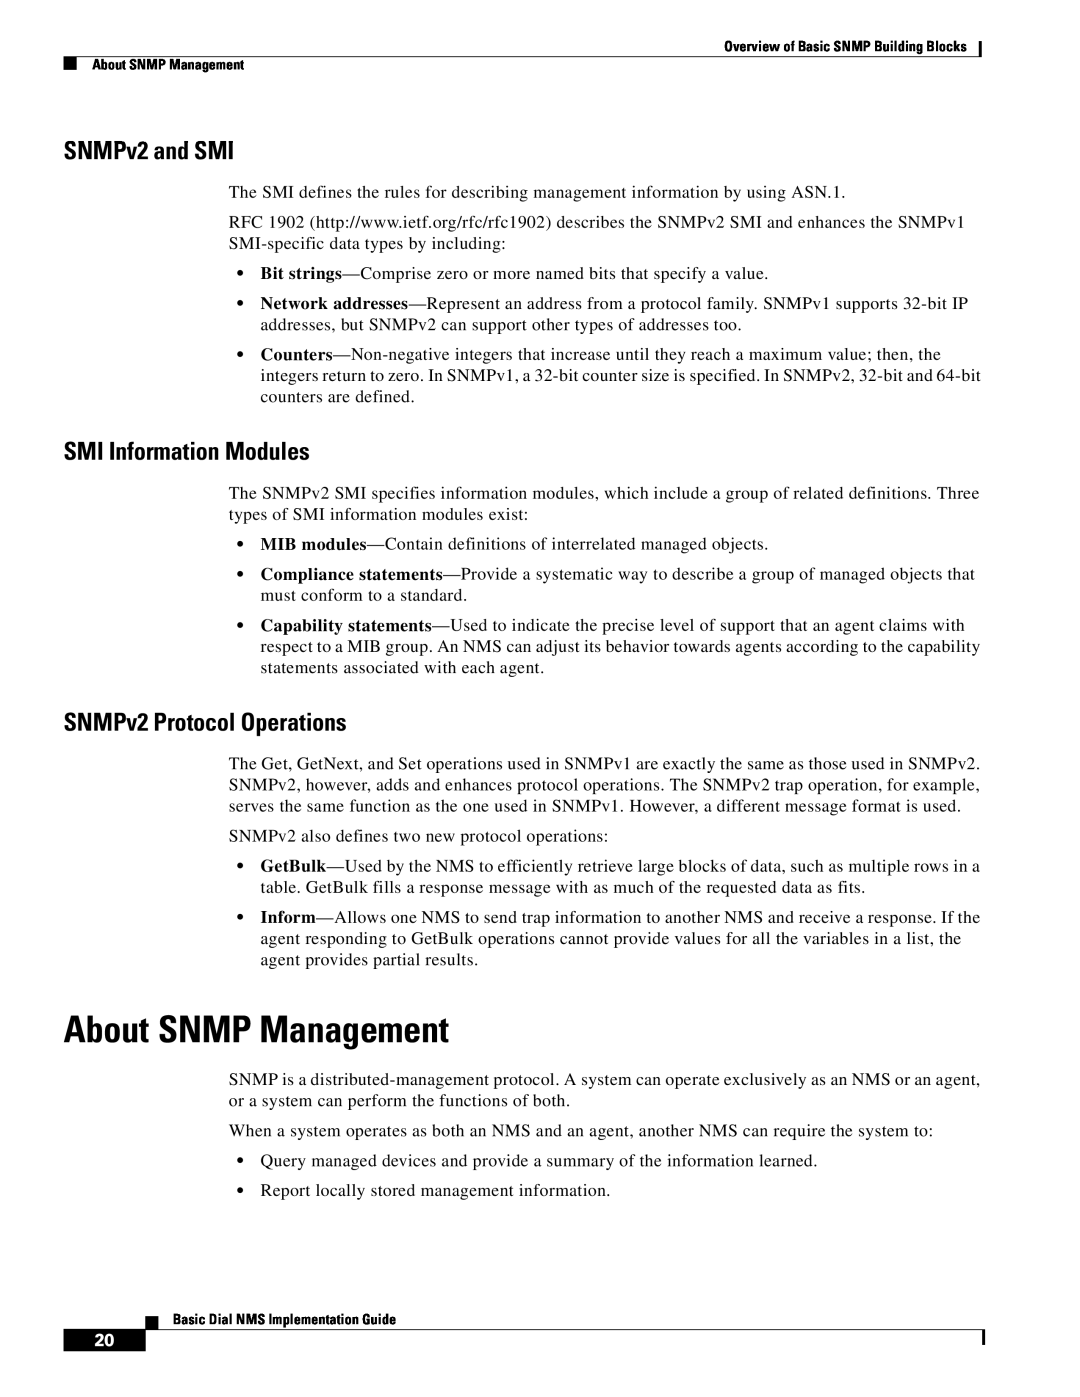 Cisco Systems Dial NMS manual About SNMP Management, SNMPv2 and SMI, SMI Information Modules, SNMPv2 Protocol Operations 